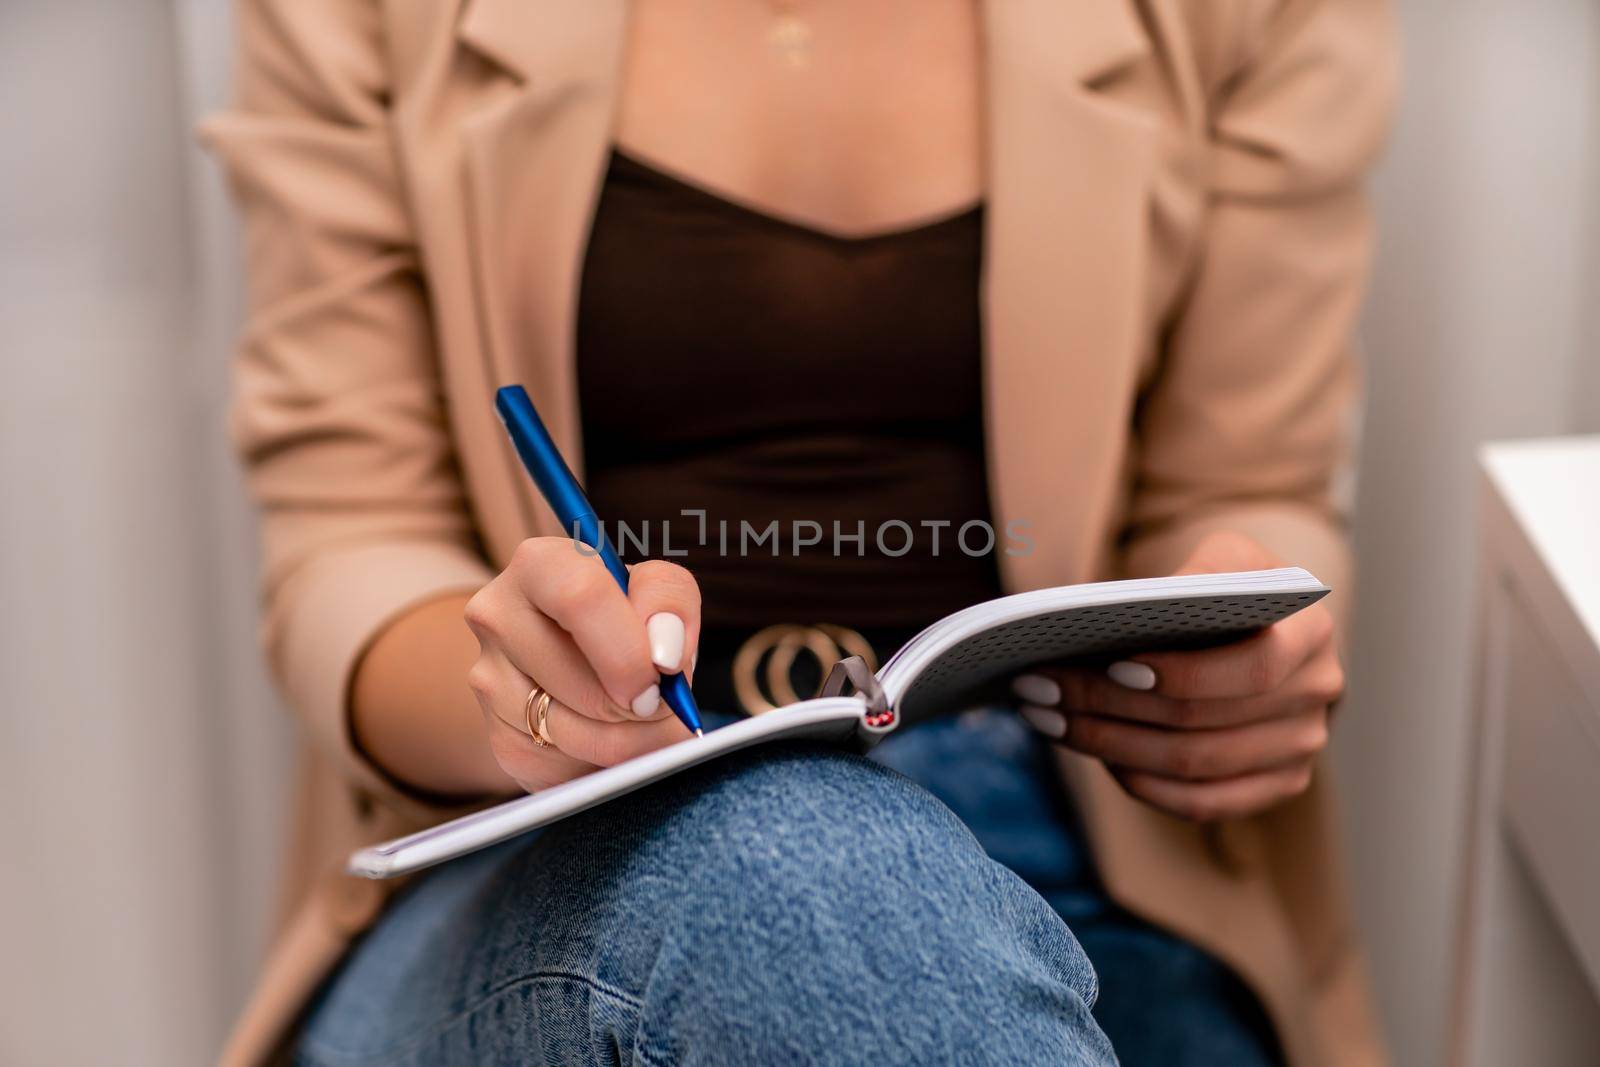 European woman writes in a notebook. She is wearing a beige jacket and jeans